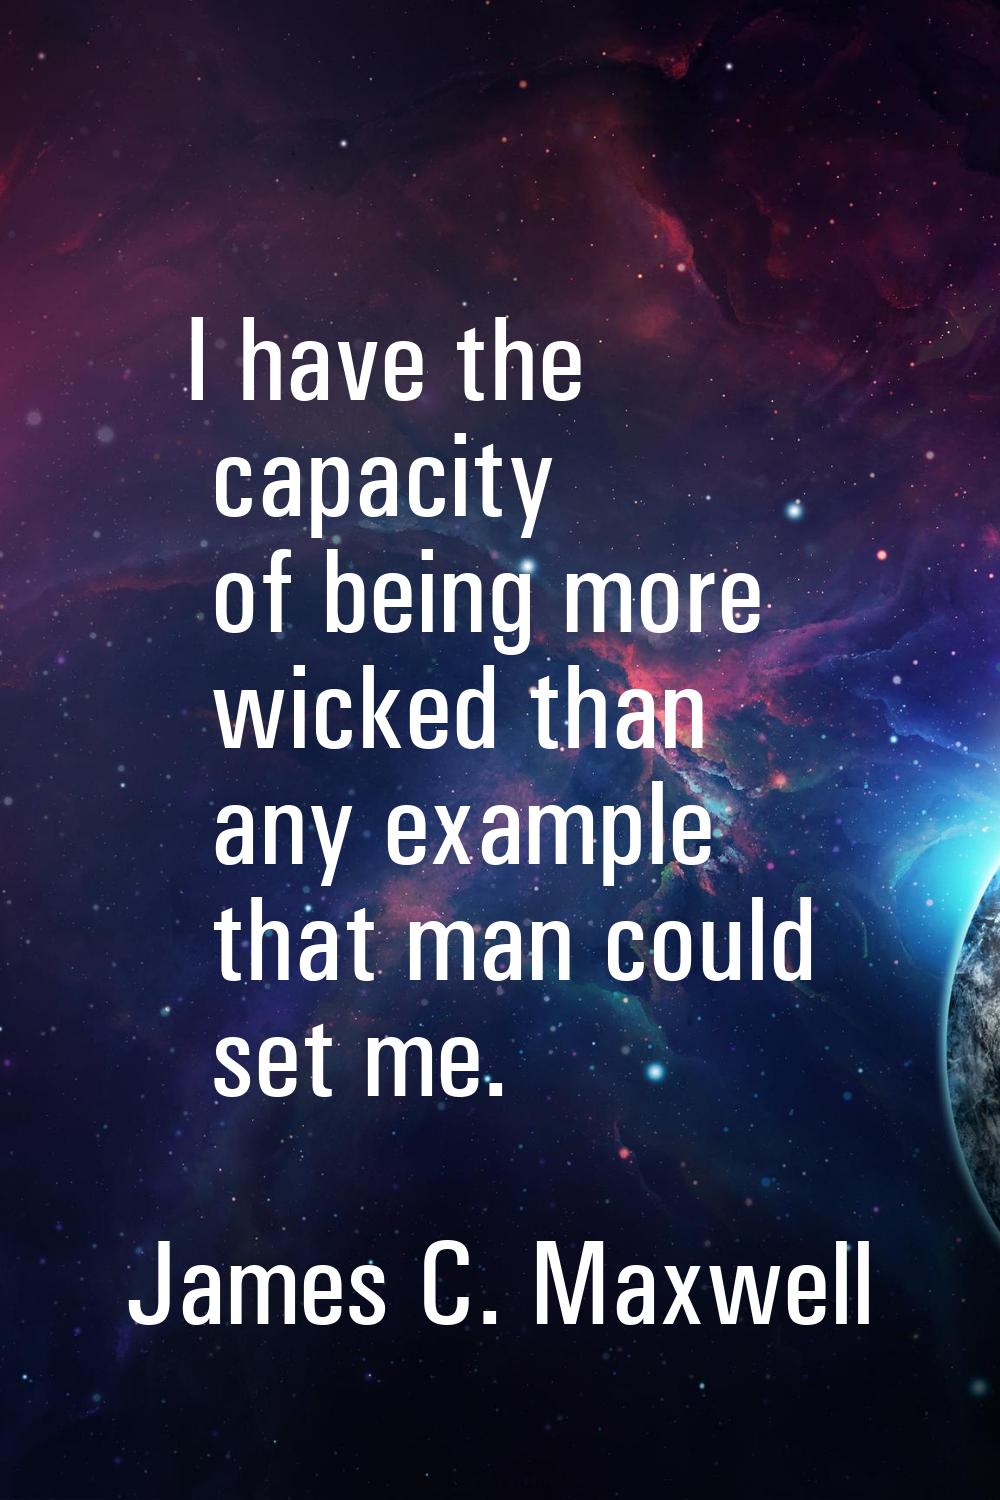 I have the capacity of being more wicked than any example that man could set me.